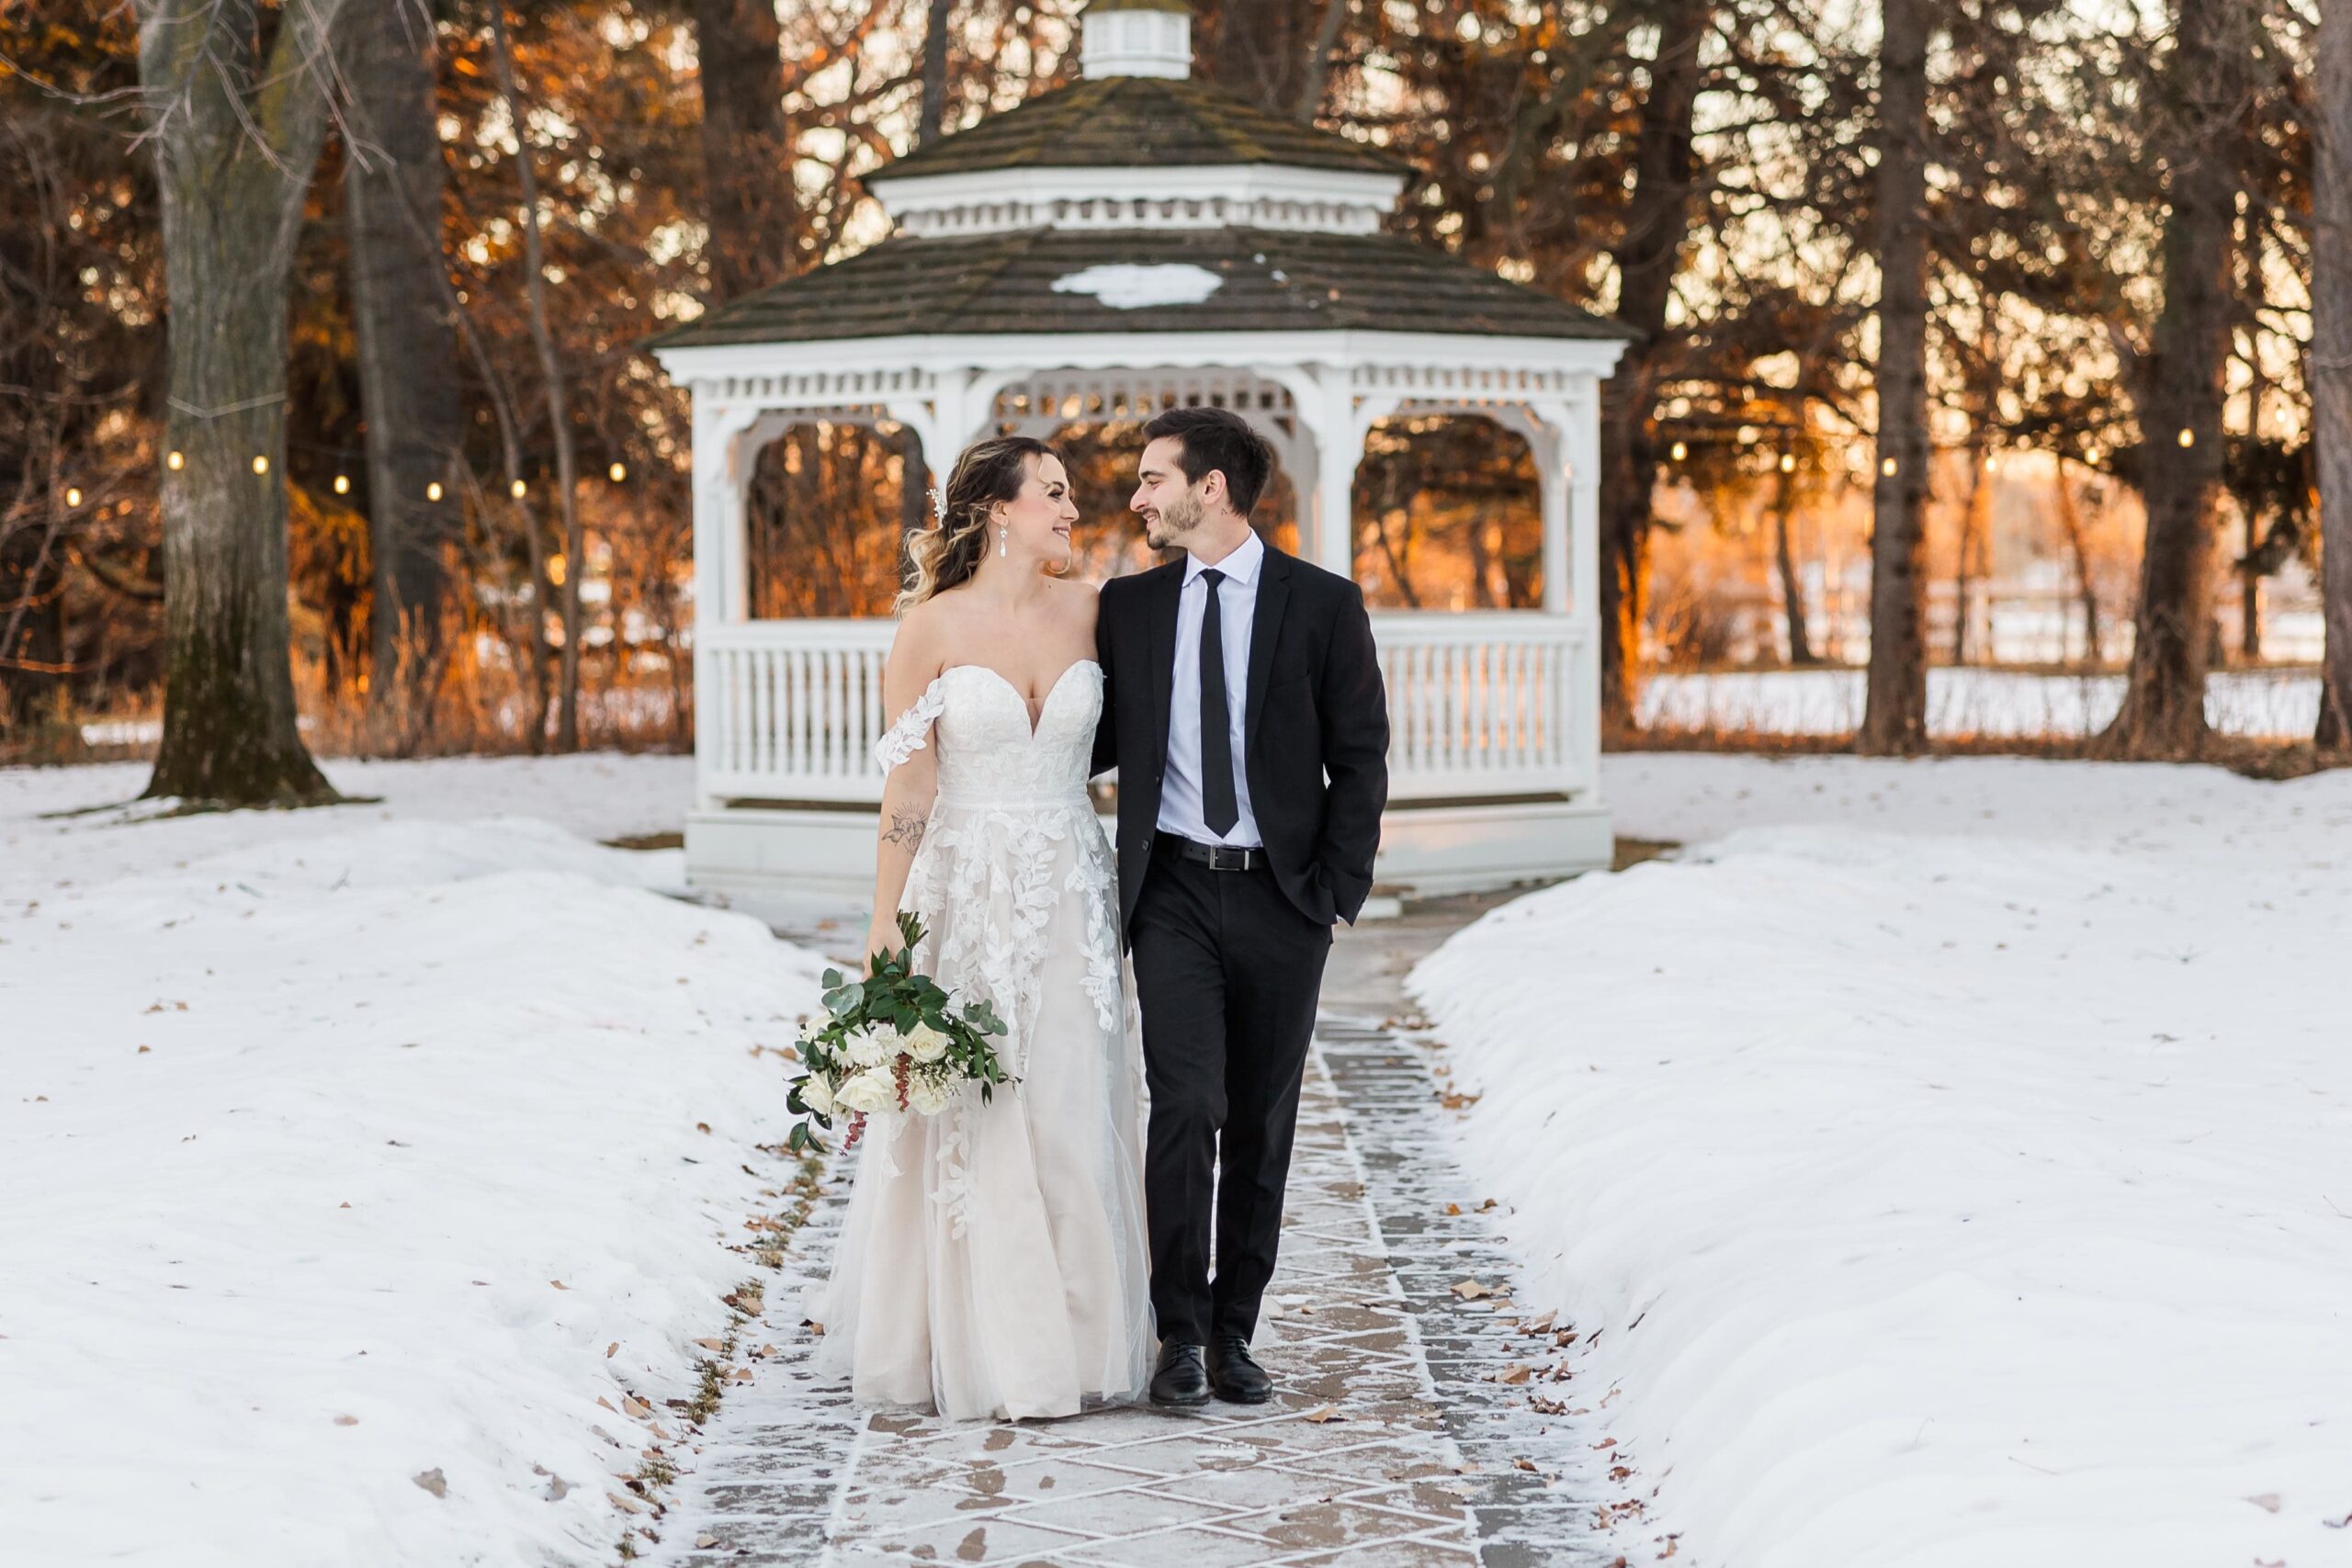 Brittany Anne Photography – Winter Wonderland at the Norland Historic Estate-21